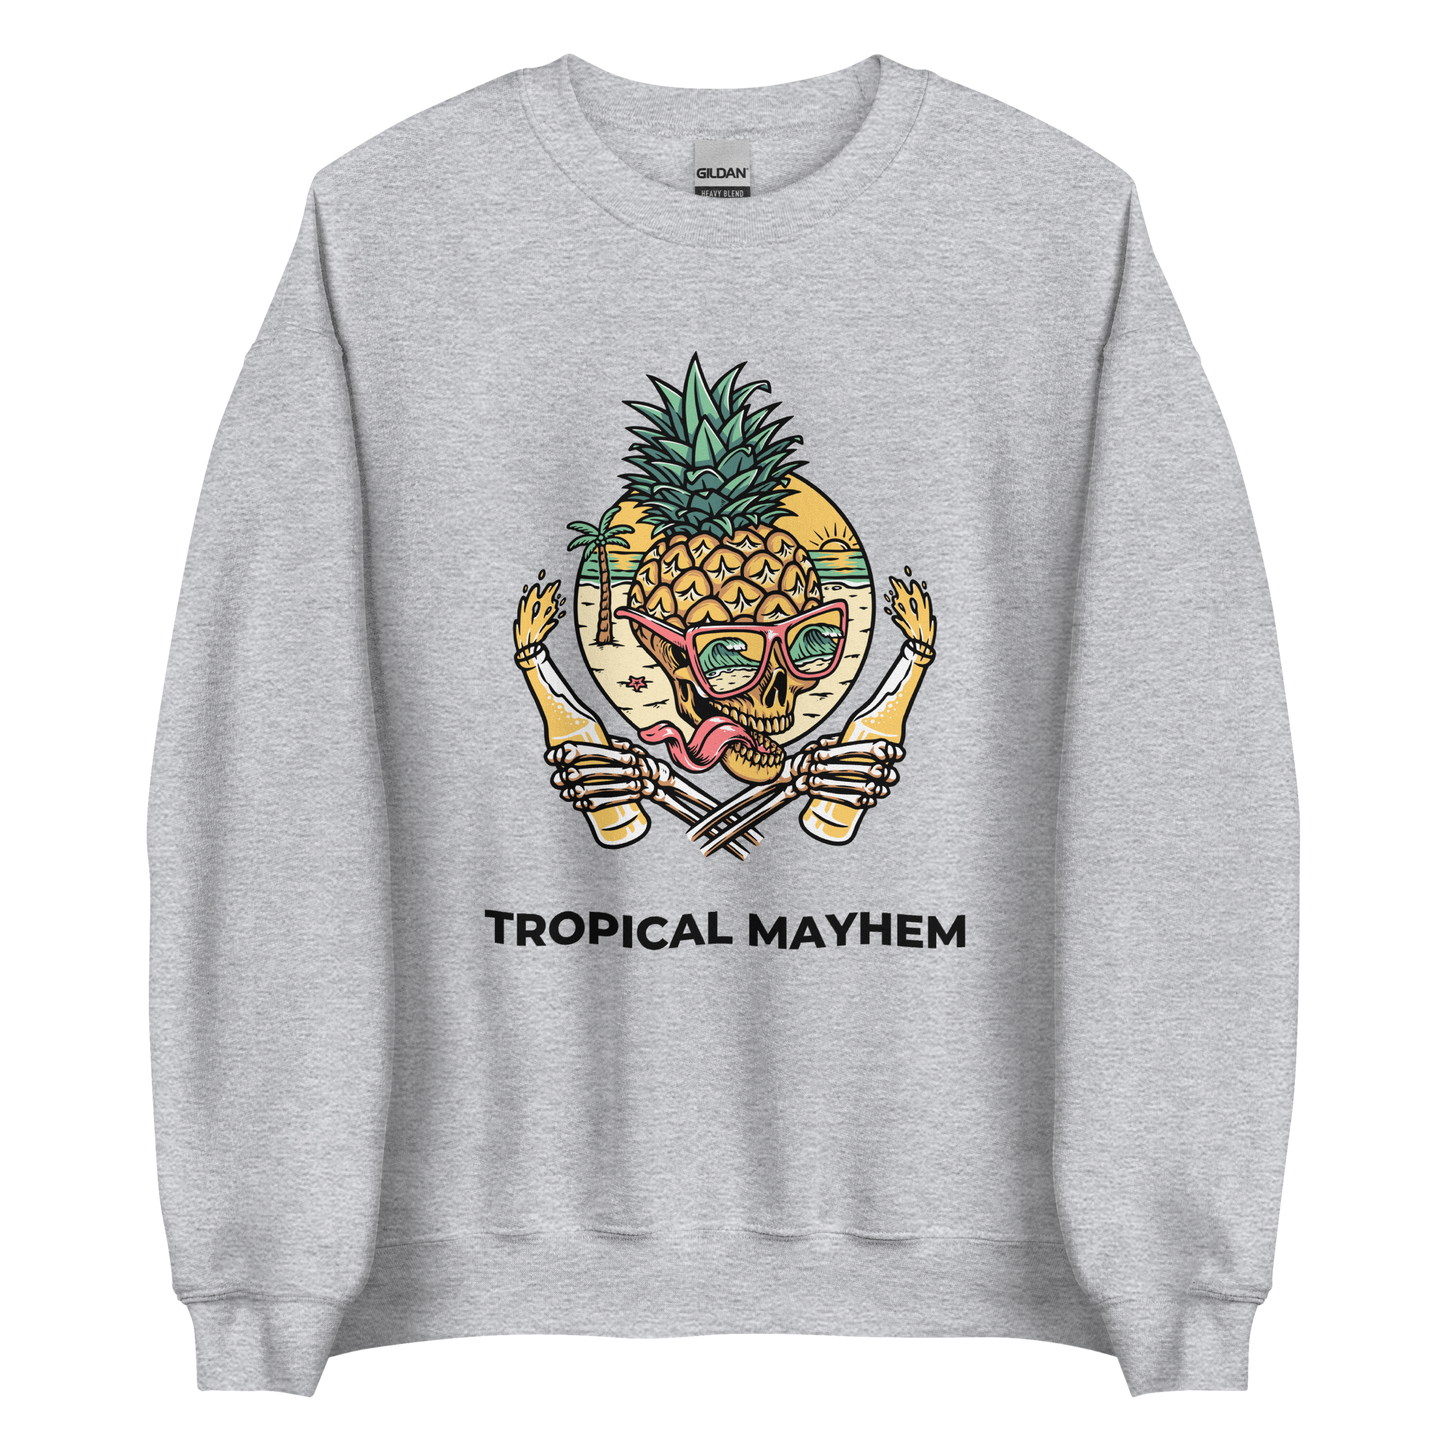 Sport Grey Tropical Mayhem Sweatshirt featuring a Crazy Pineapple Skull graphic on the chest - Funny Graphic Pineapple Sweatshirts - Boozy Fox